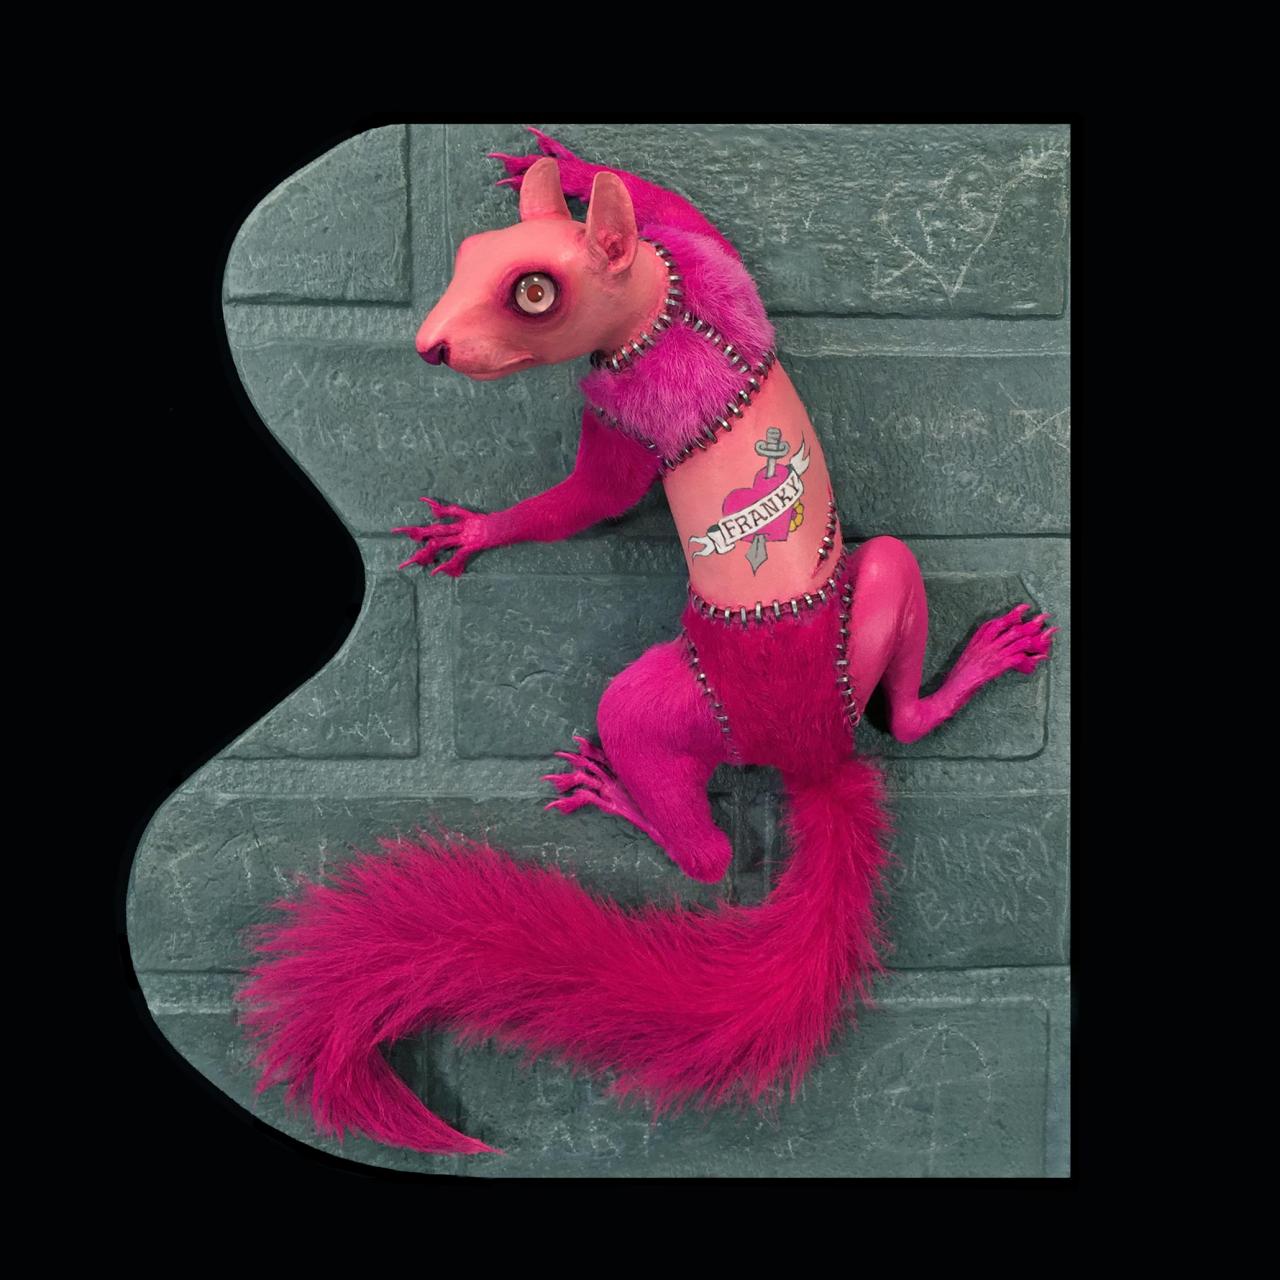 A pink squirrel on the wall